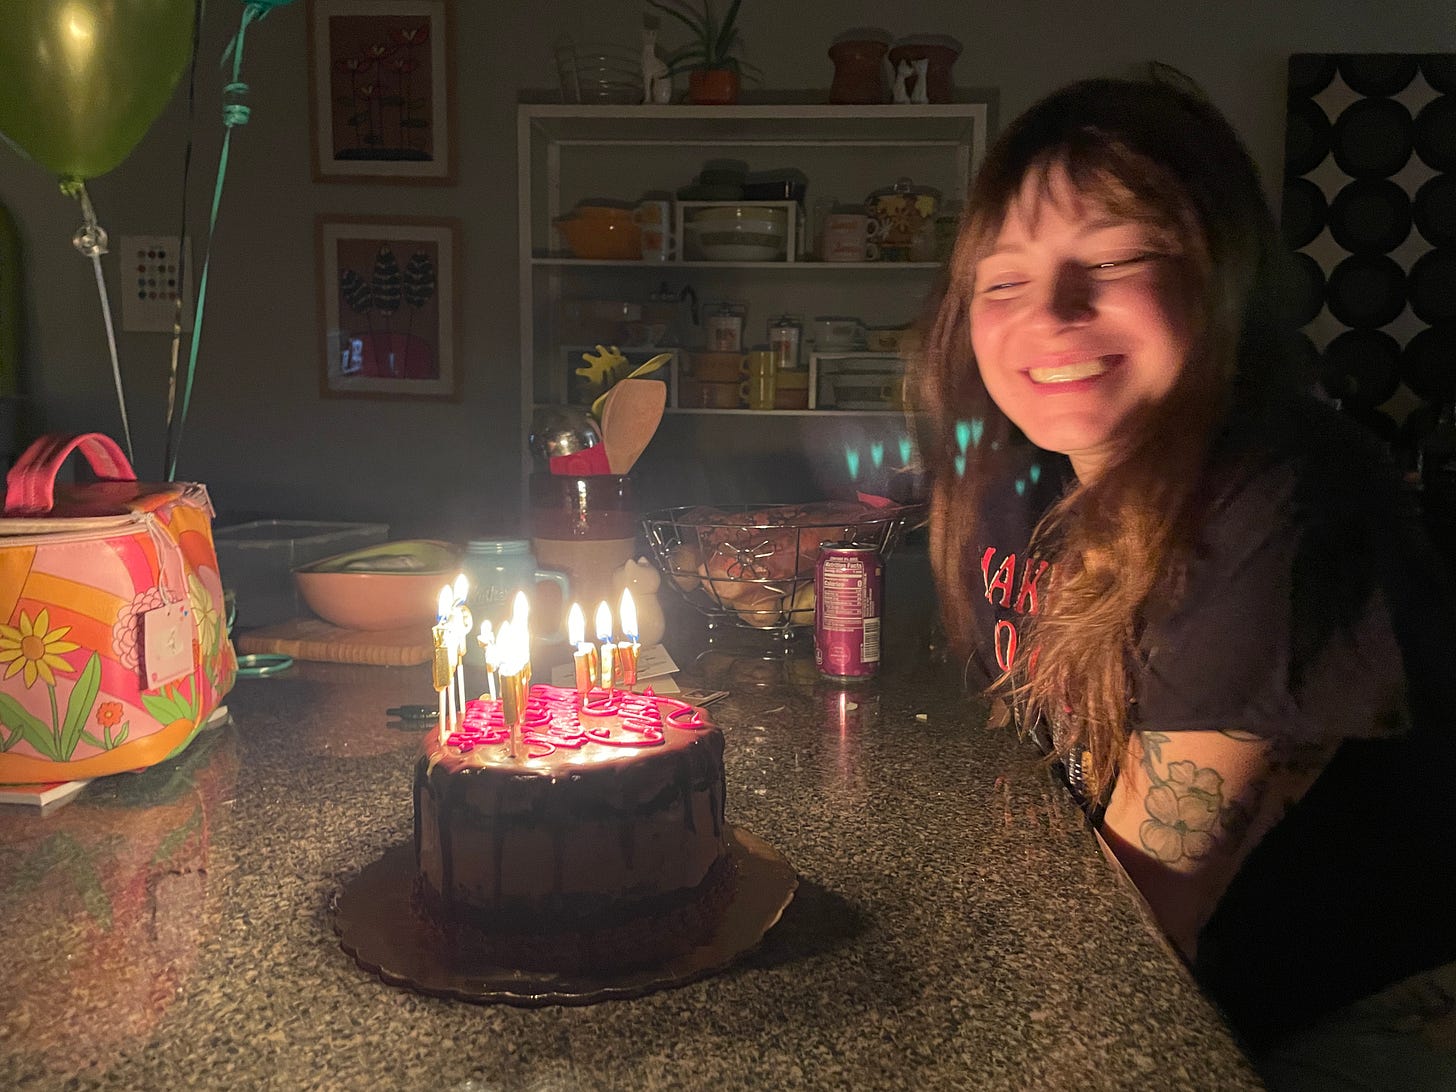 Casey smiling and looking at her birthday cake, which is lit with candles.